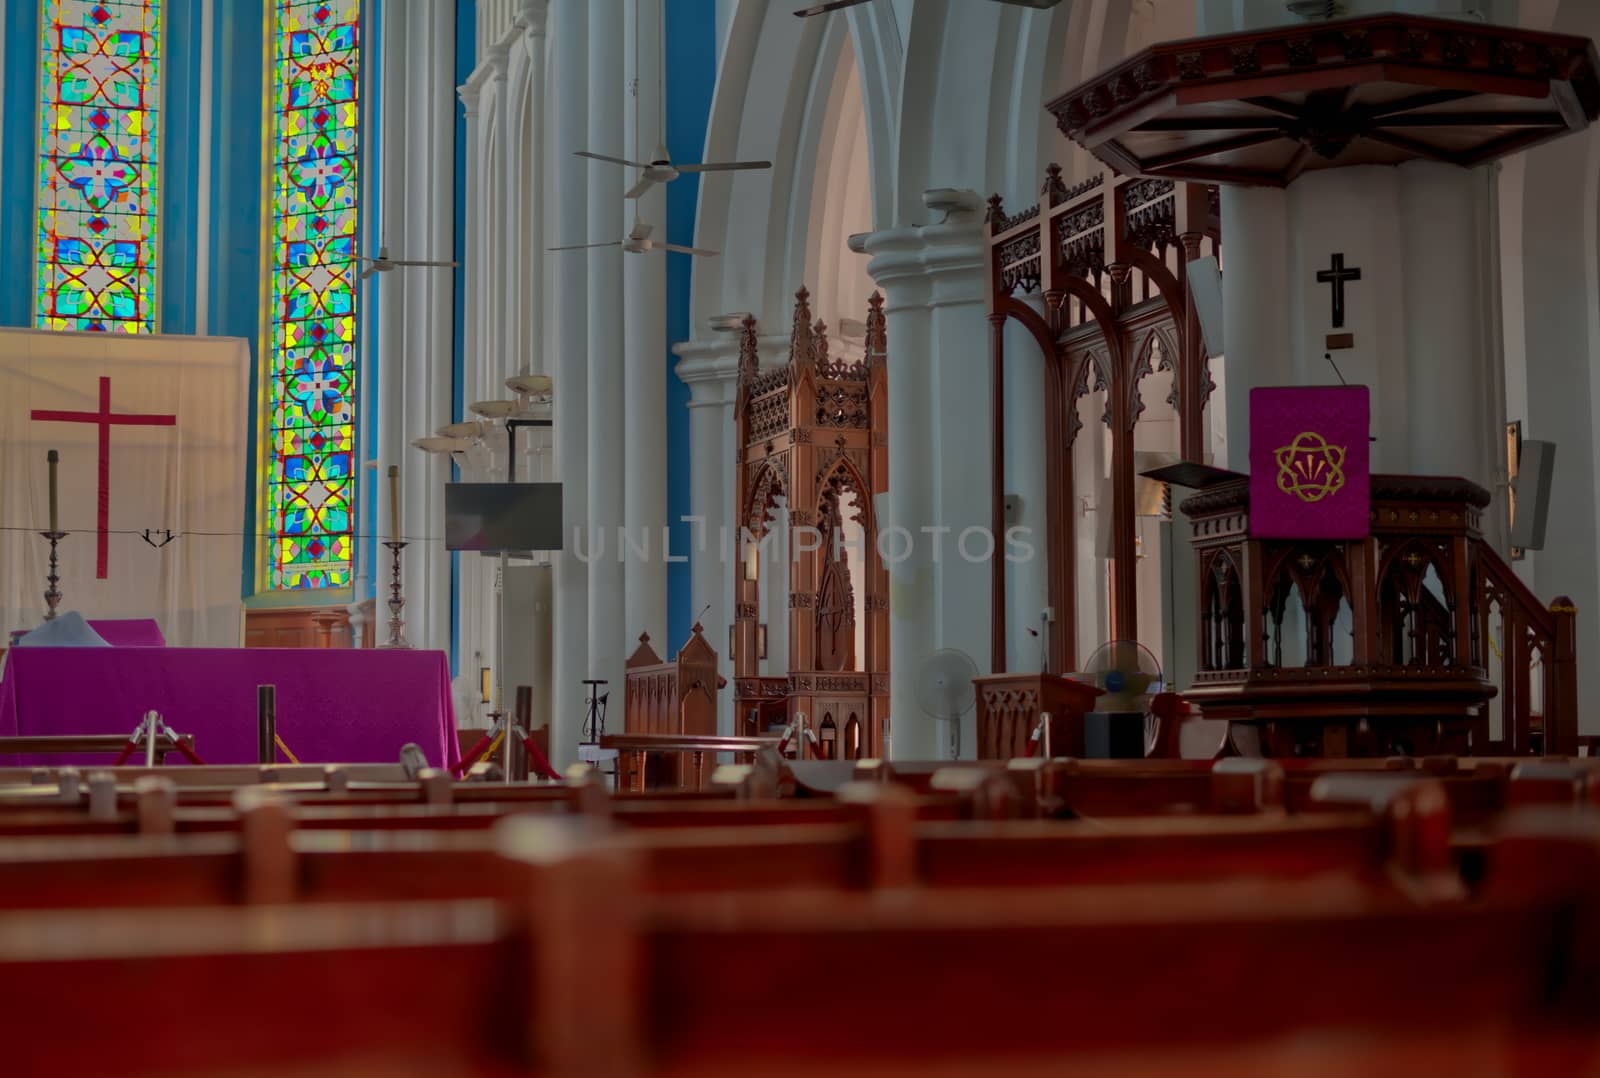 Saint Andrew s Anglican Cathedral Singapore of Gothic Revival style choir stained glass ambulatory chapel wooden pulpit fans benches